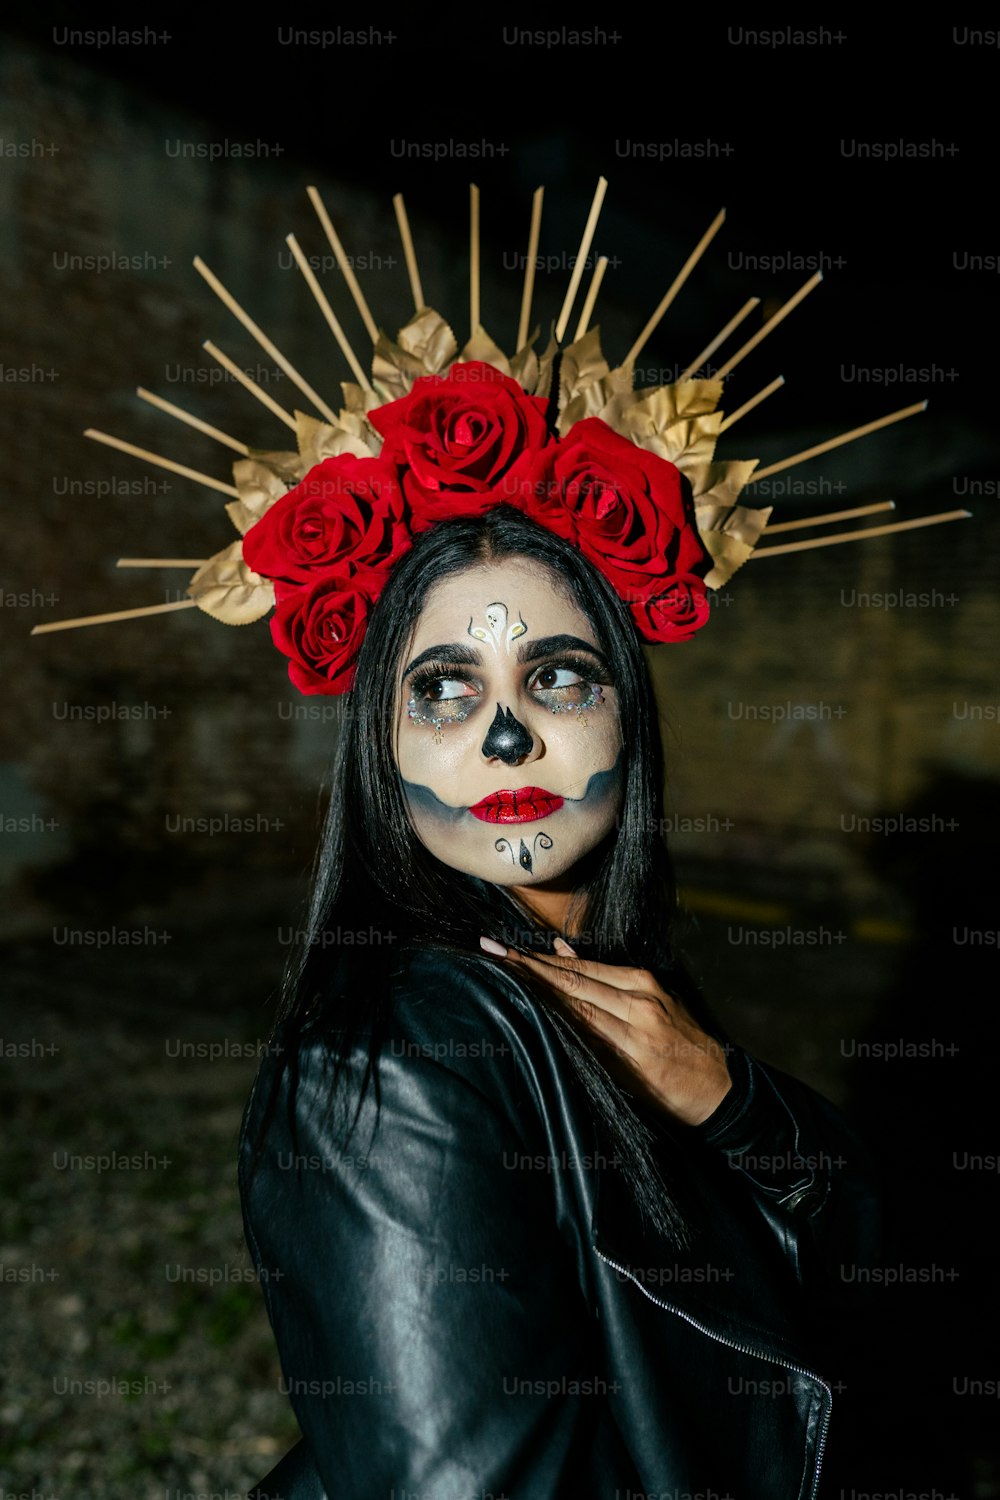 a woman with makeup and makeup art on her face